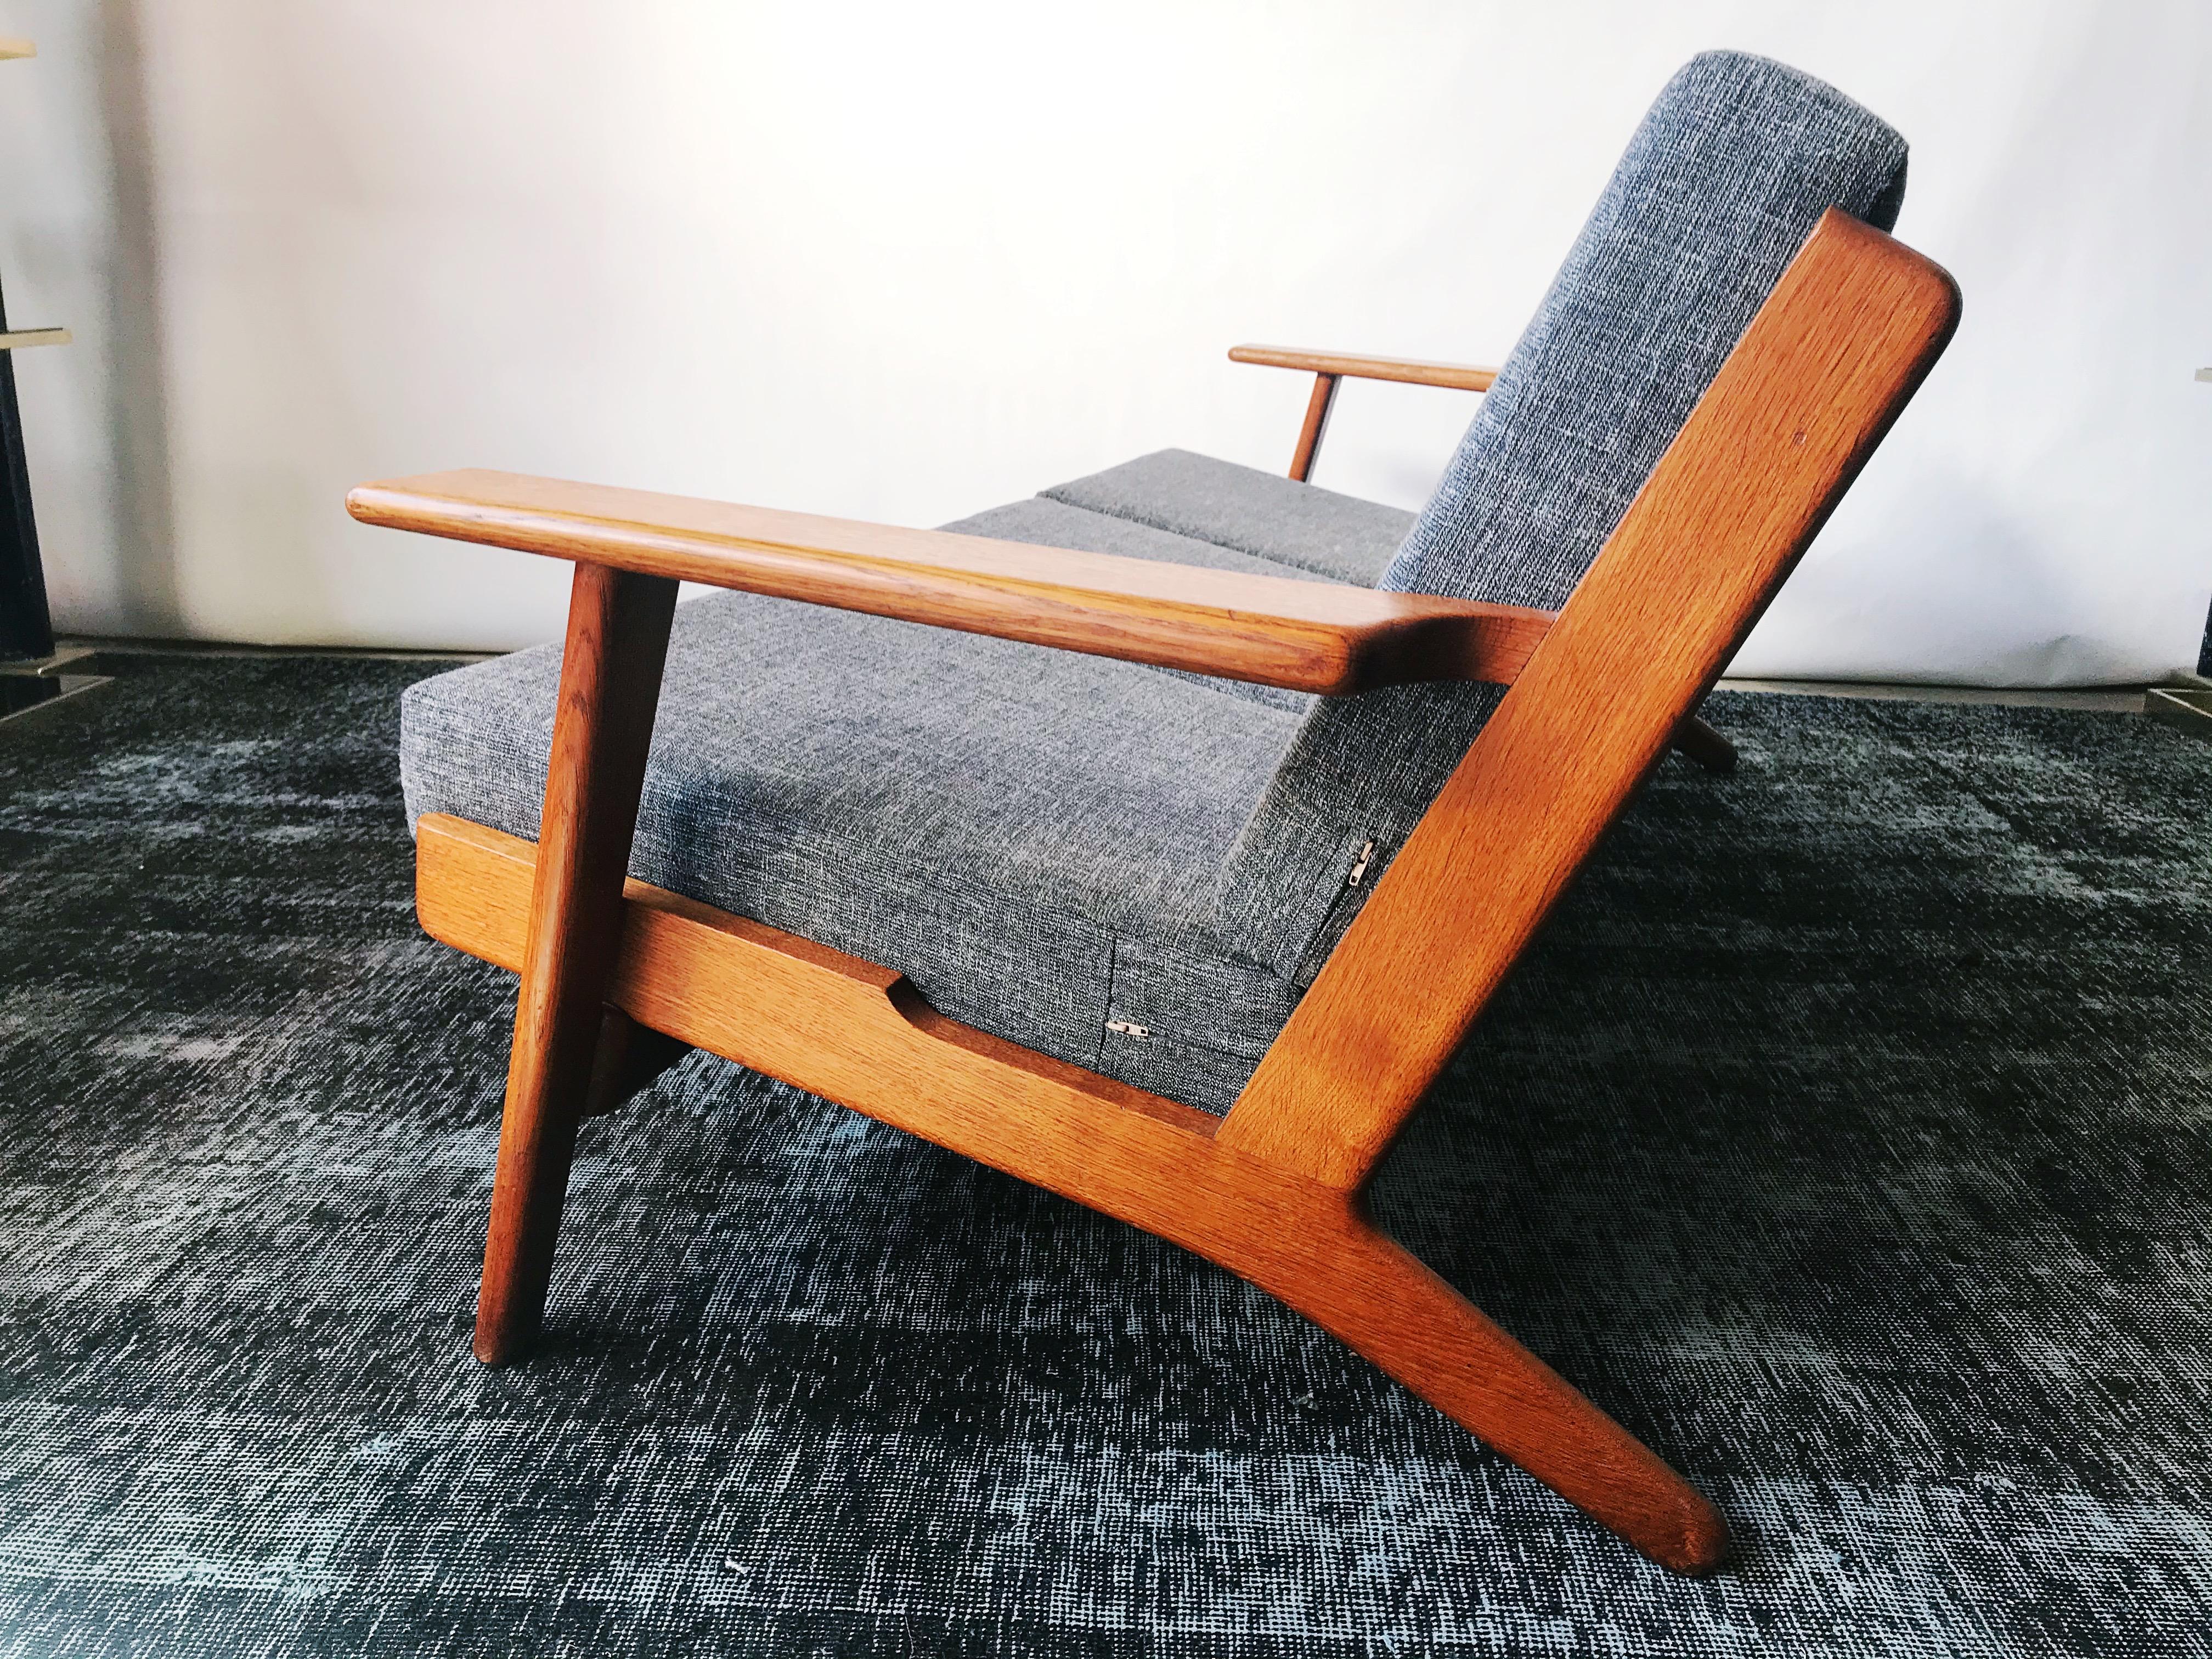 This vintage GE 290 3-seat sofa designed by Hans J. Wegner for GETAMA is overall great condition. Solid oak frame. New foam and new upholstery,
1953. Made in Denmark.
Dimensions:
H 29.53 in. x W 70.87 in. x D 30.71 in
seat height 16.54 in.